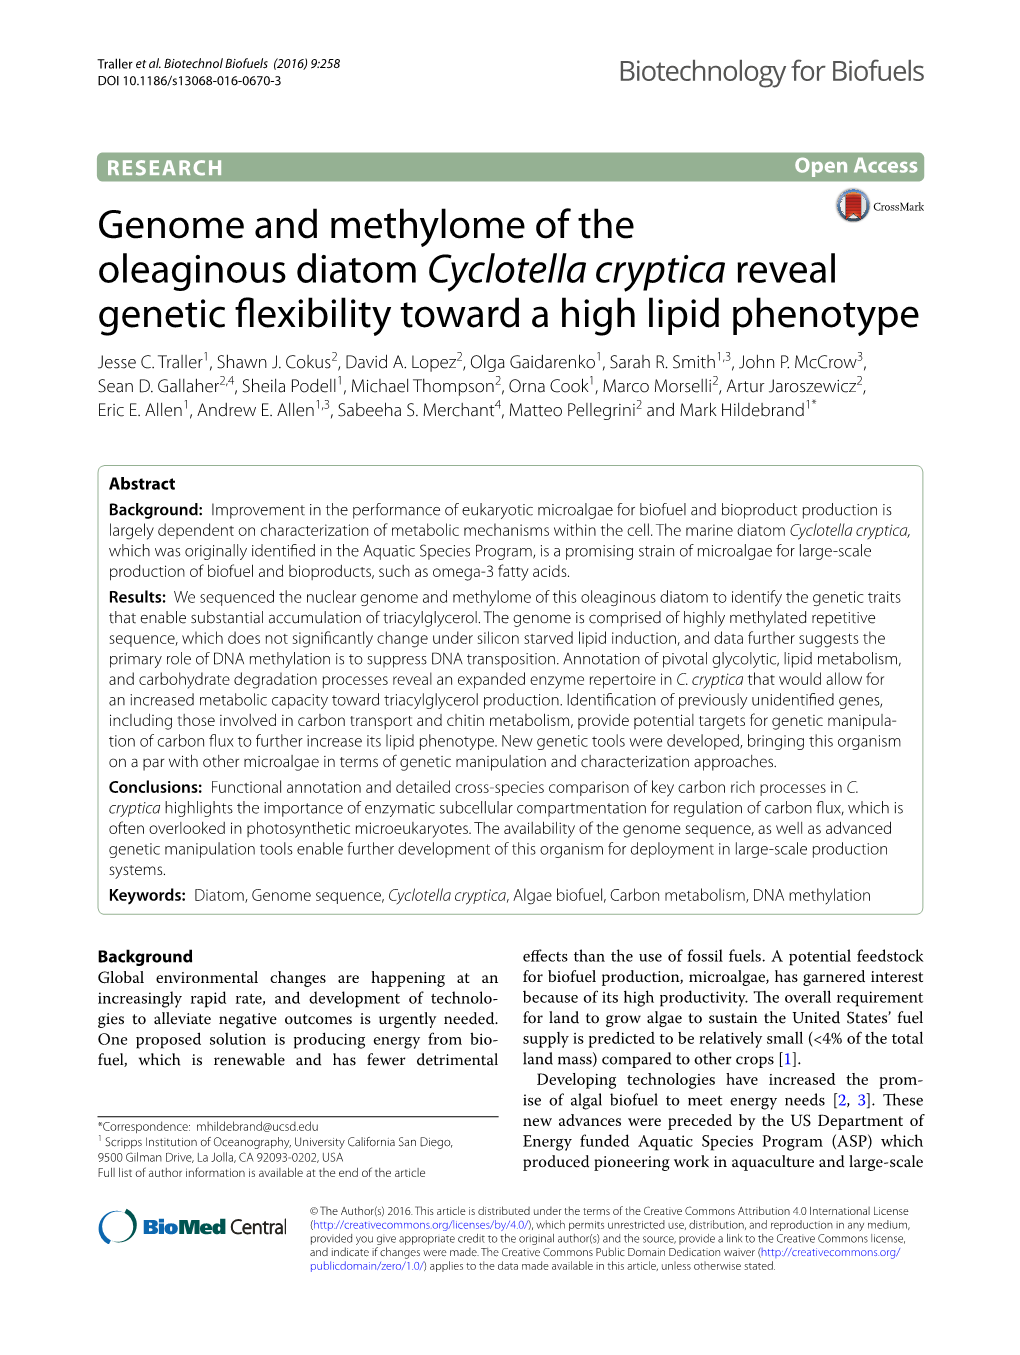 Genome and Methylome of the Oleaginous Diatom Cyclotella Cryptica Reveal Genetic Flexibility Toward a High Lipid Phenotype Jesse C